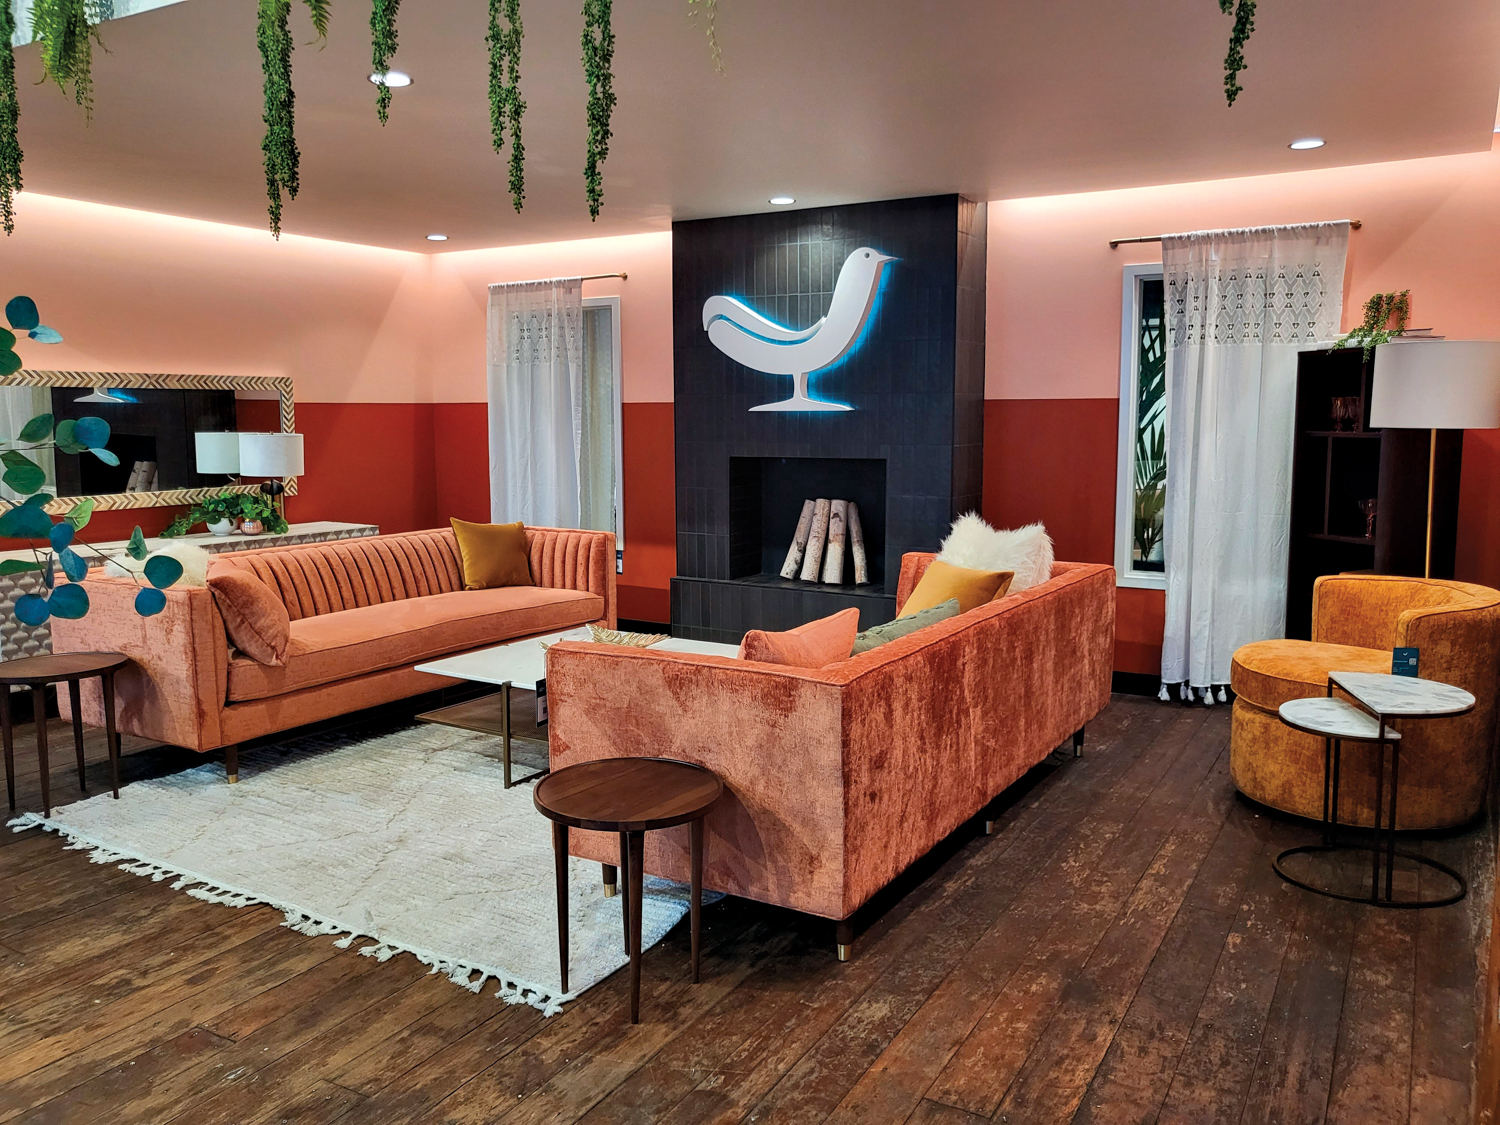 Showroom with coral-colored tufted sofas, pink and red walls and a black tile-clad fireplace